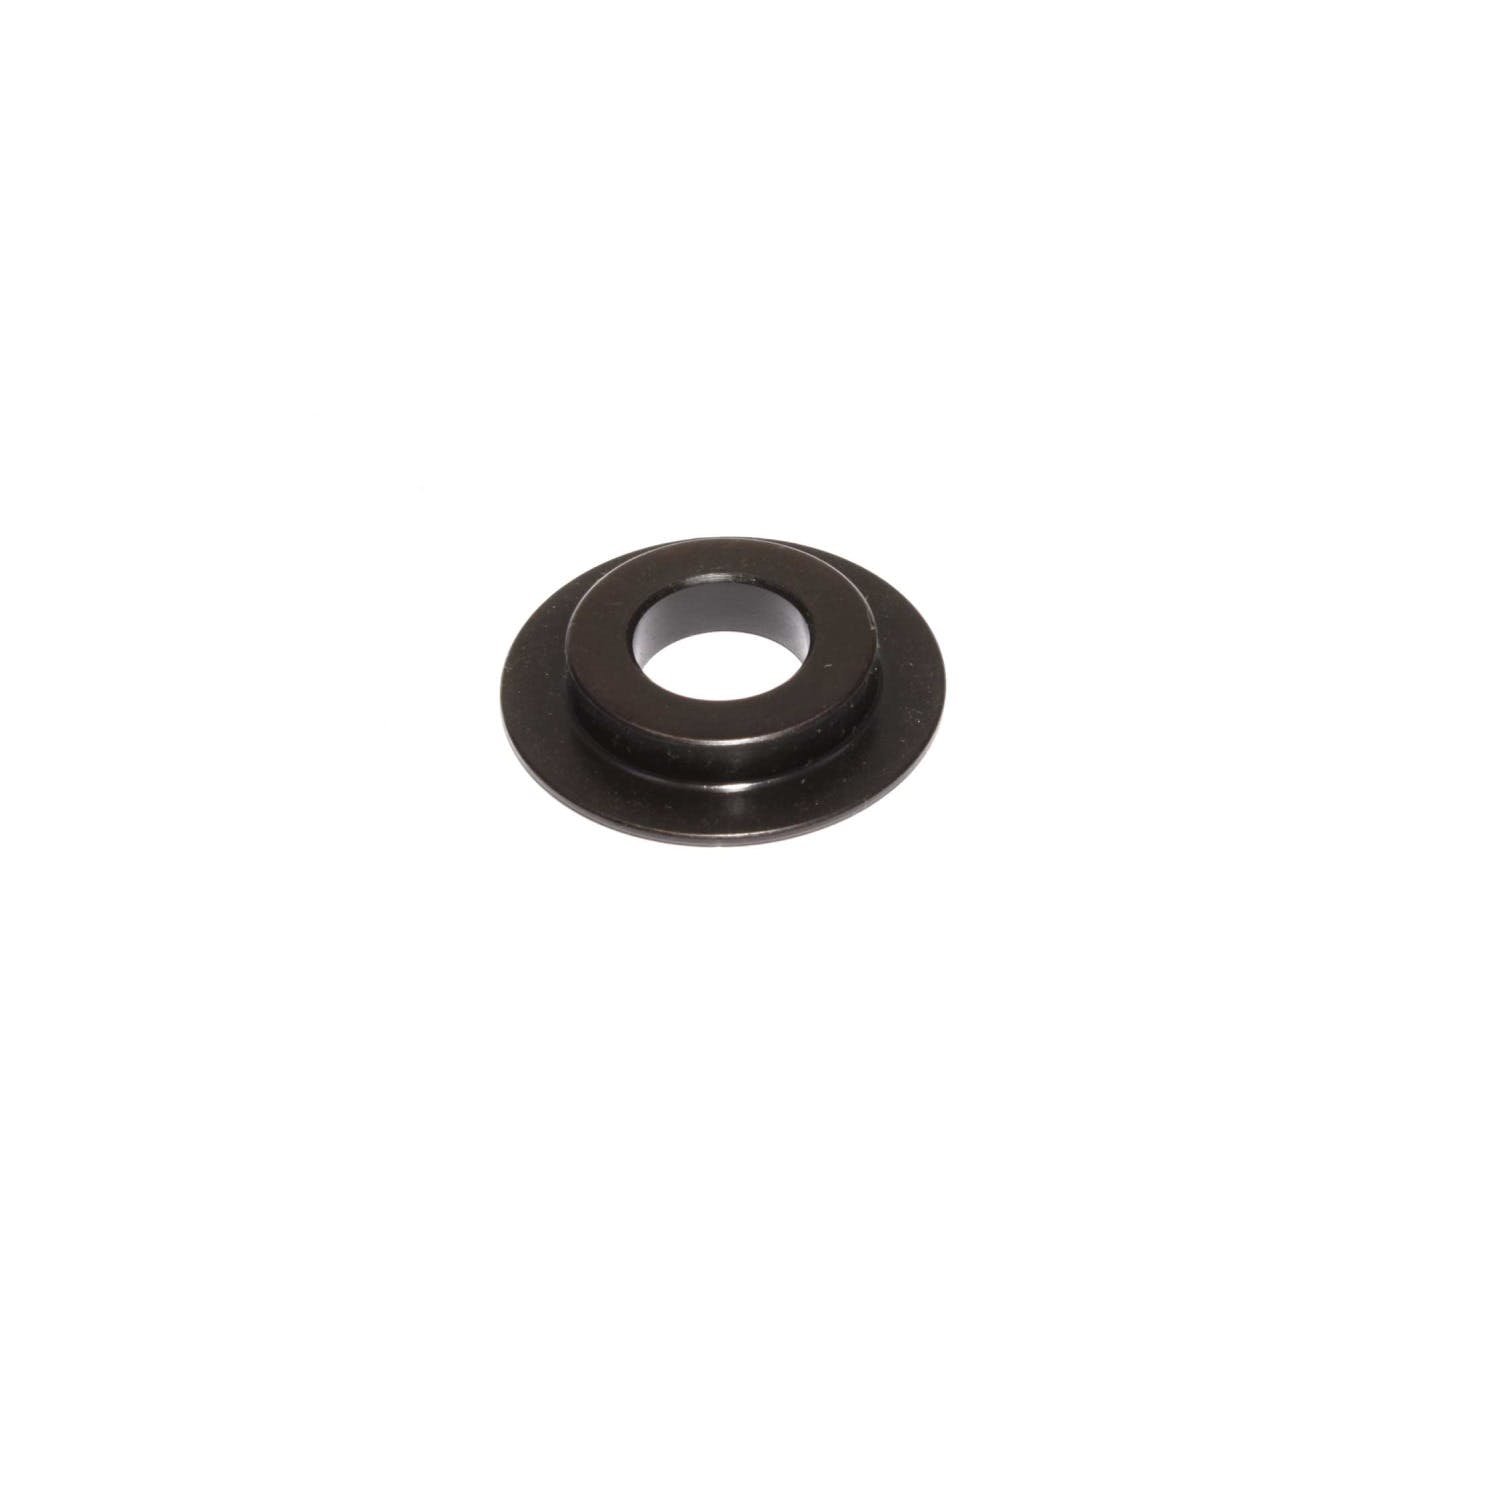 Competition Cams 4667-1 ID Spring Locator - 1.420 inch OD, .530 inch ID, .060 inch Thickness